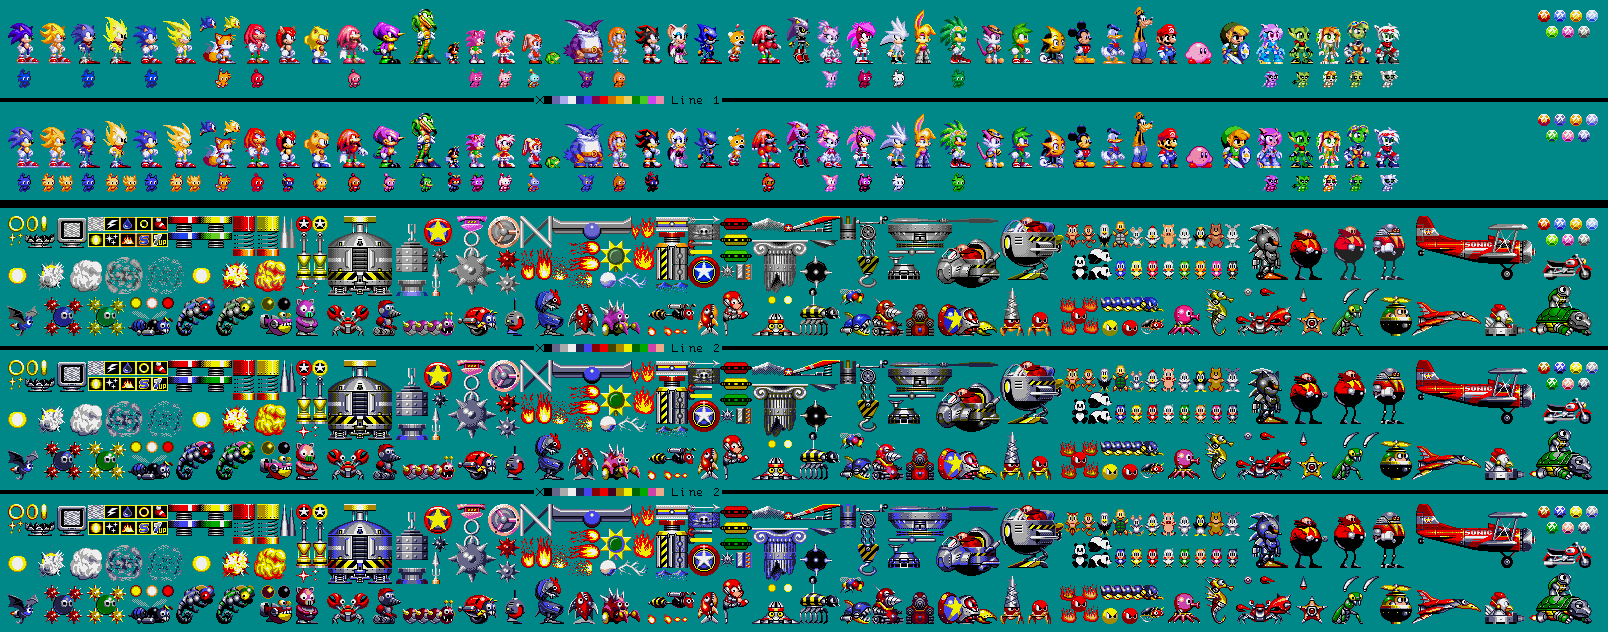 Visual Checklist for Sonic Classic Heroes by flamewingsonic on